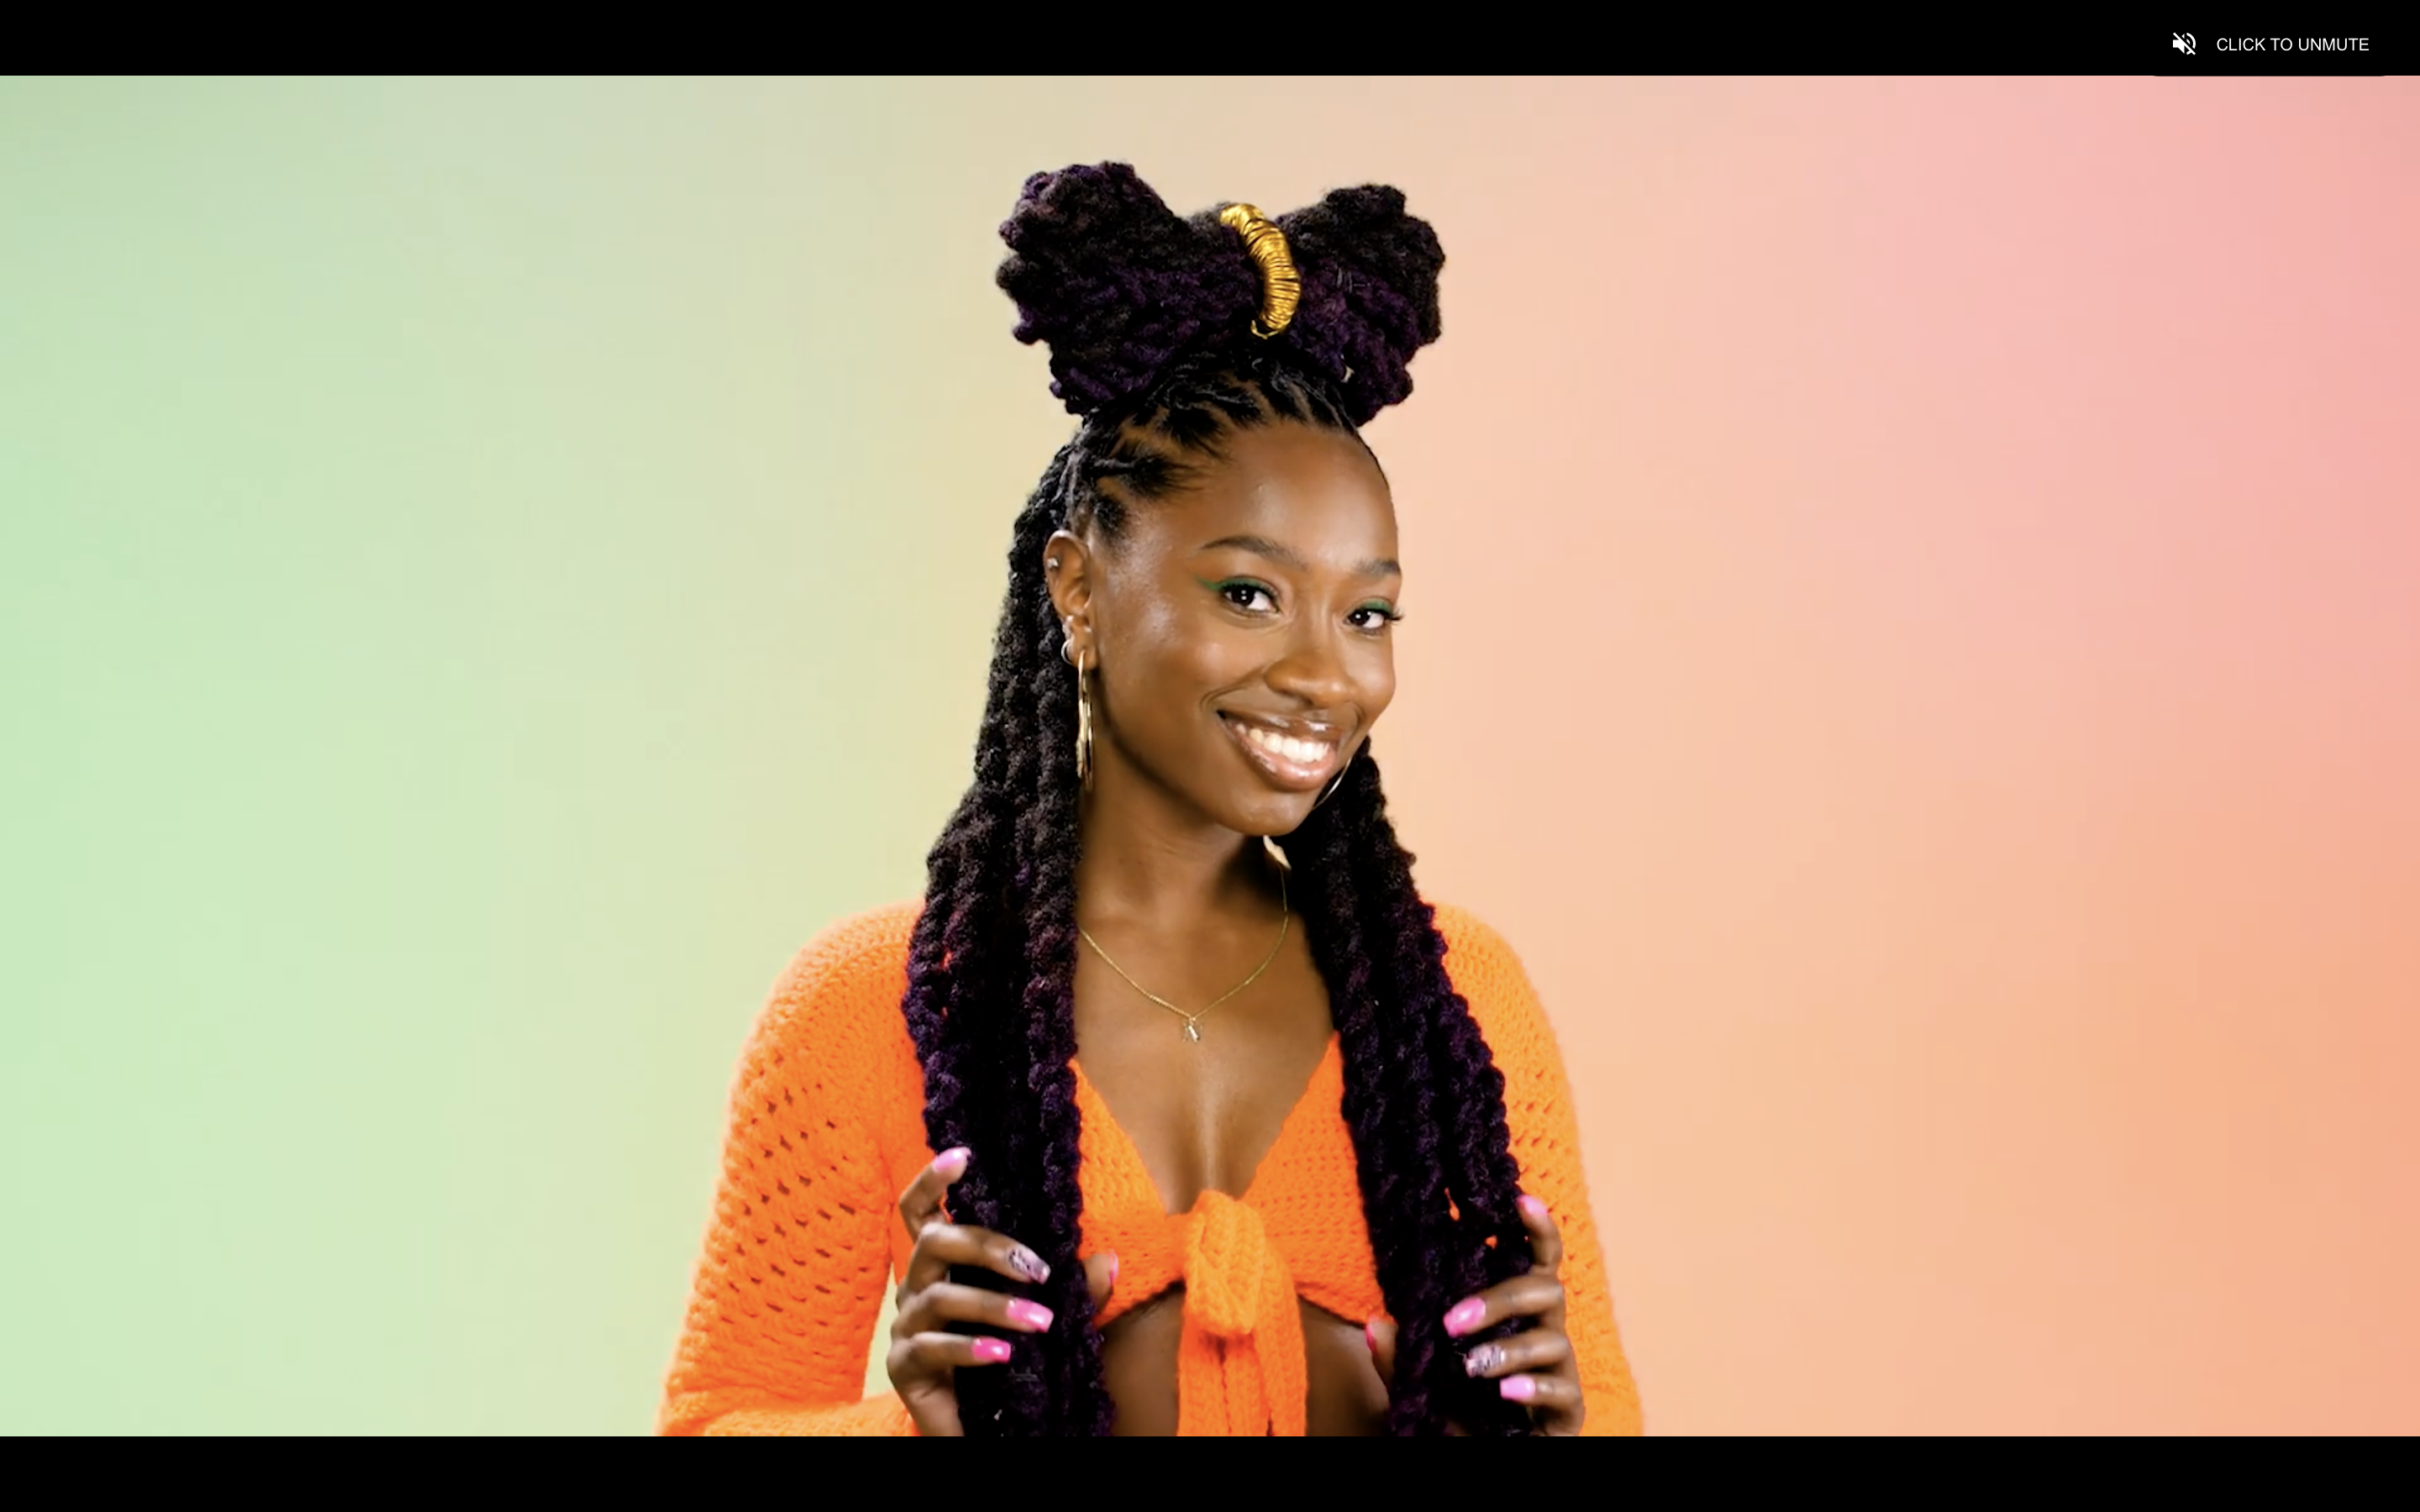 The Braid Up': How to Do Bantu Knots with Crochet Braids 2023